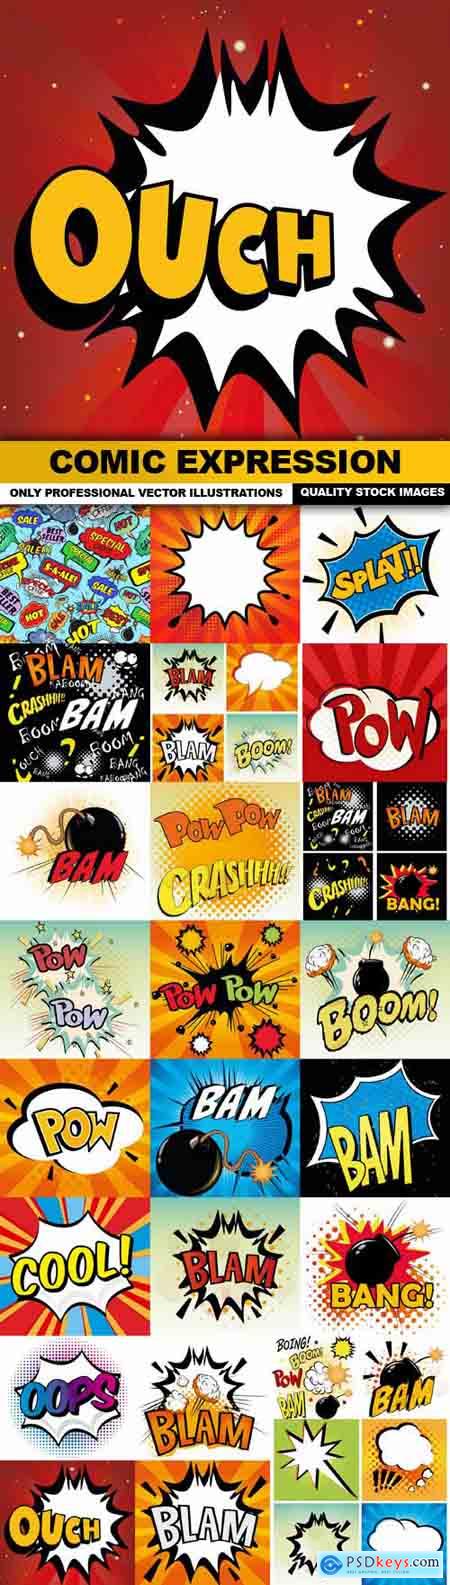 Comic Expression - 25 Vector